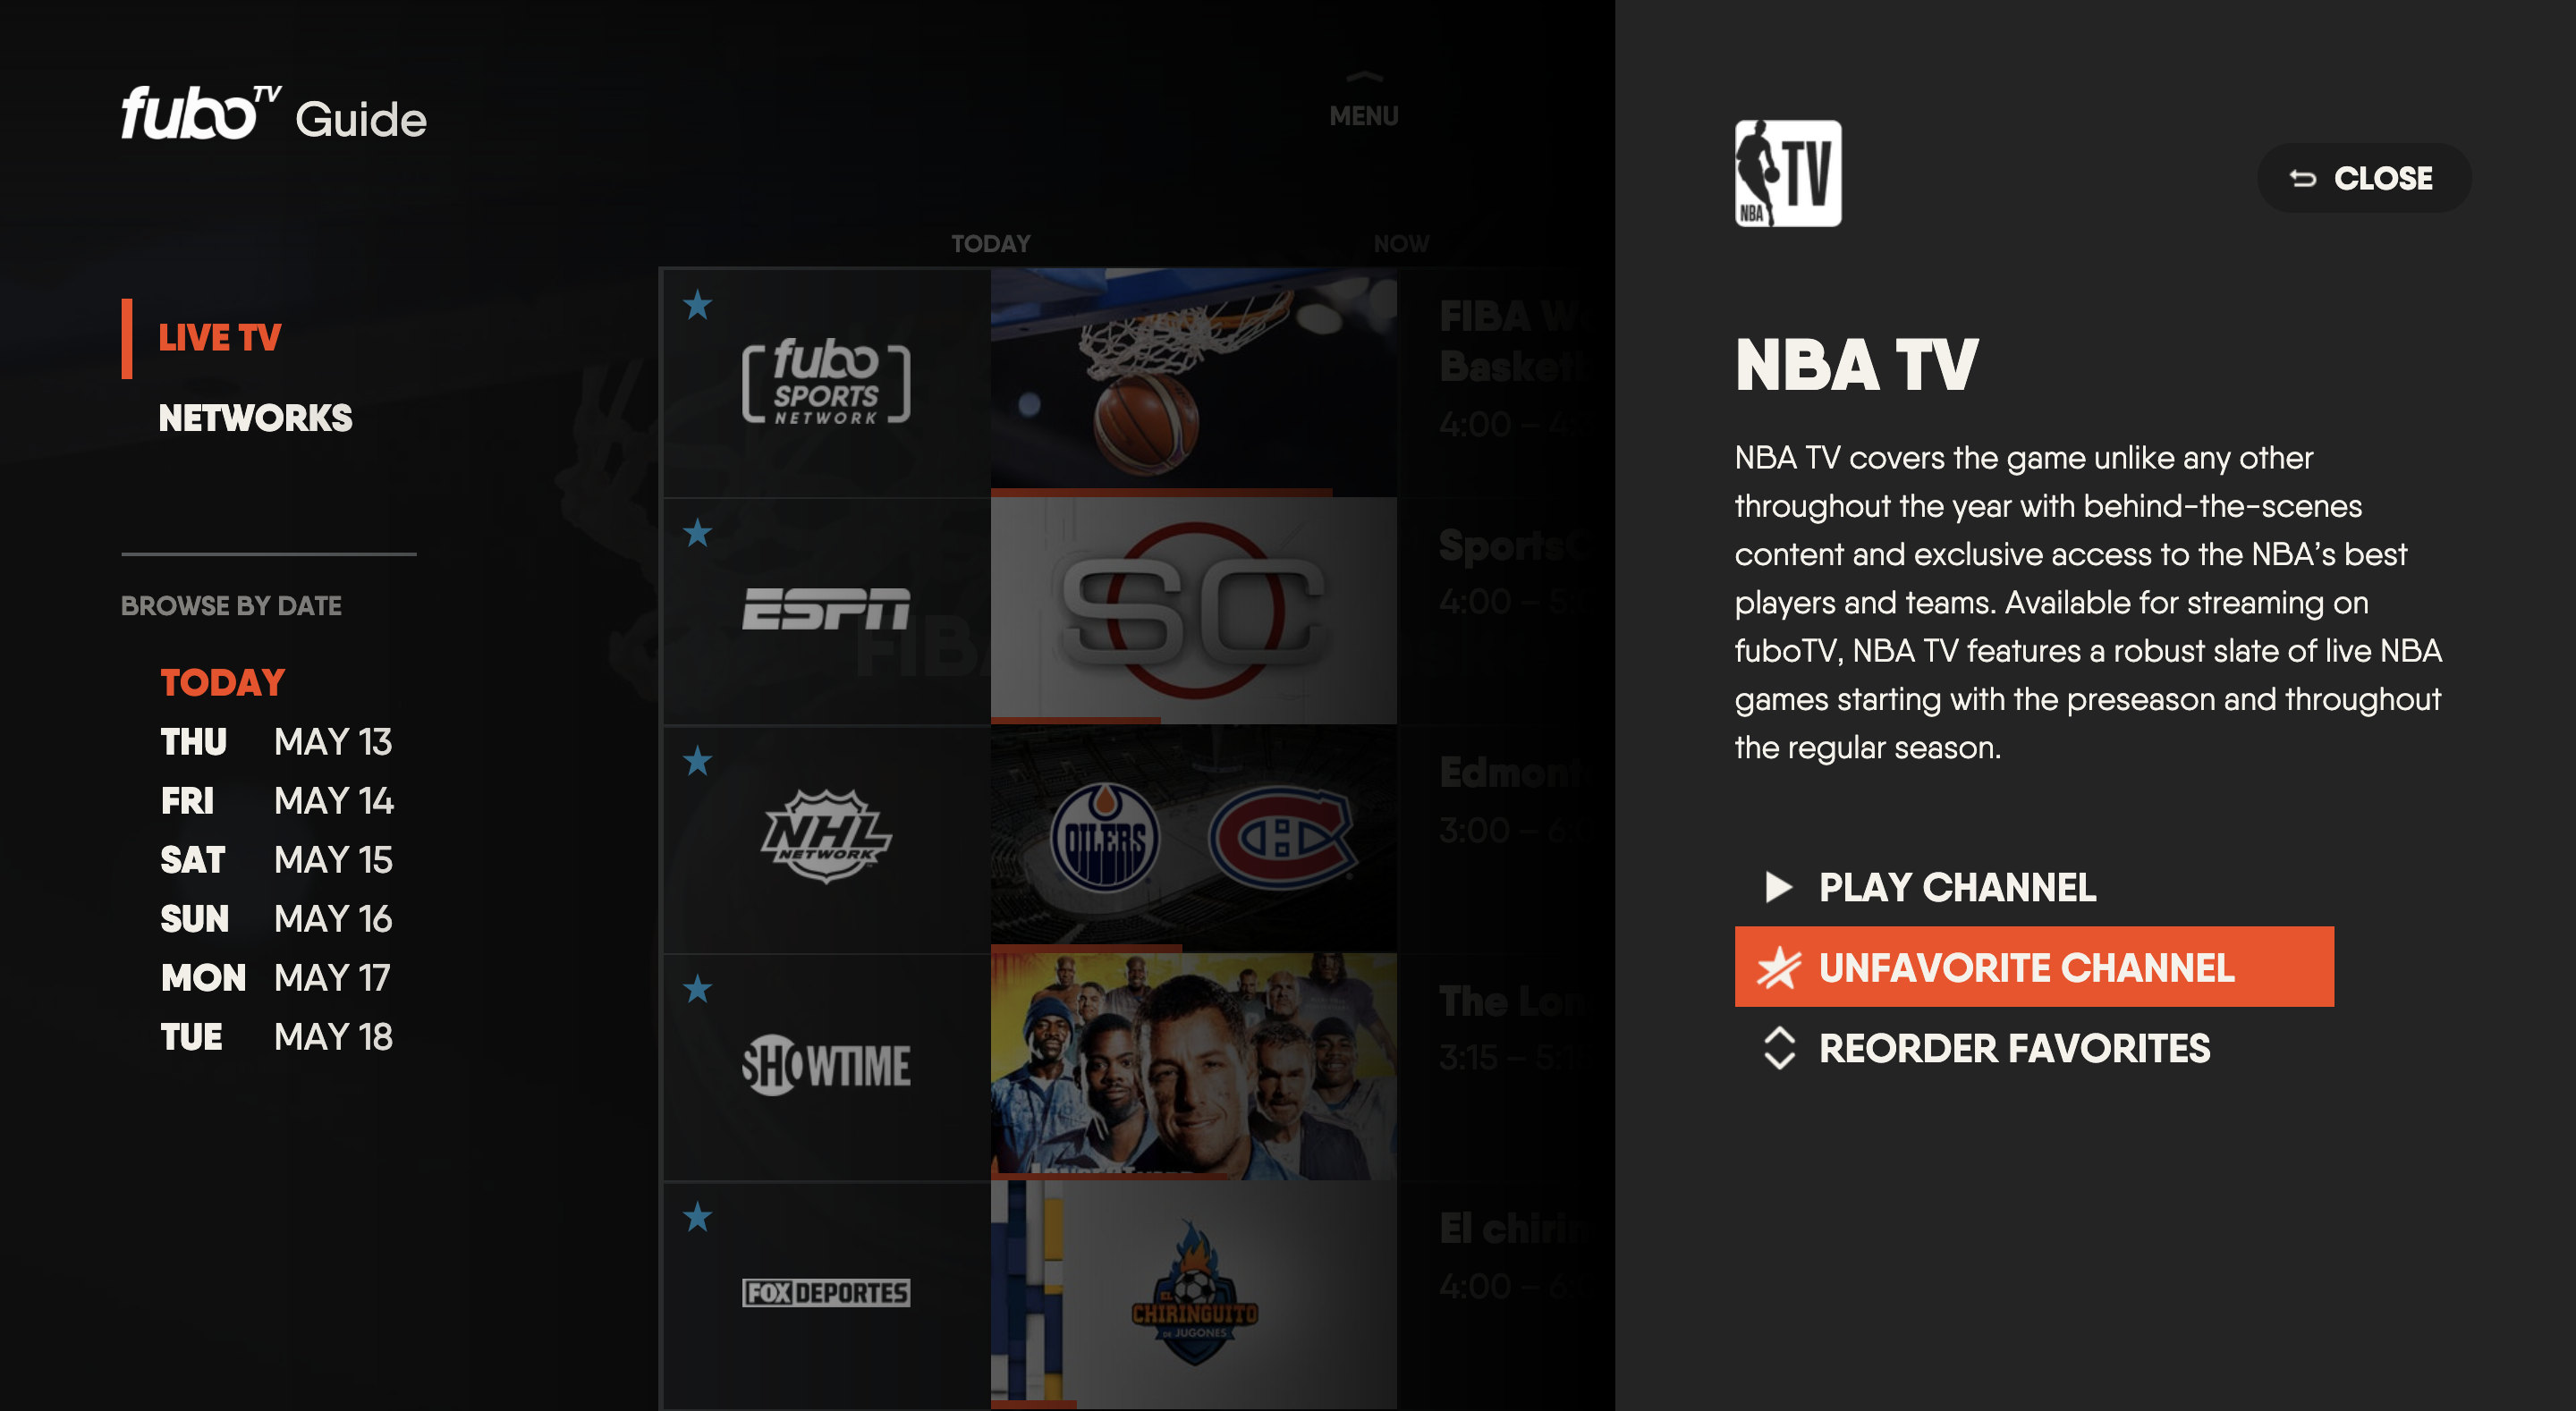 Channel details screen for the FuboTV app on Vizio TV with UNFAVORITE CHANNEL highlighted; select to remove channel from favorites